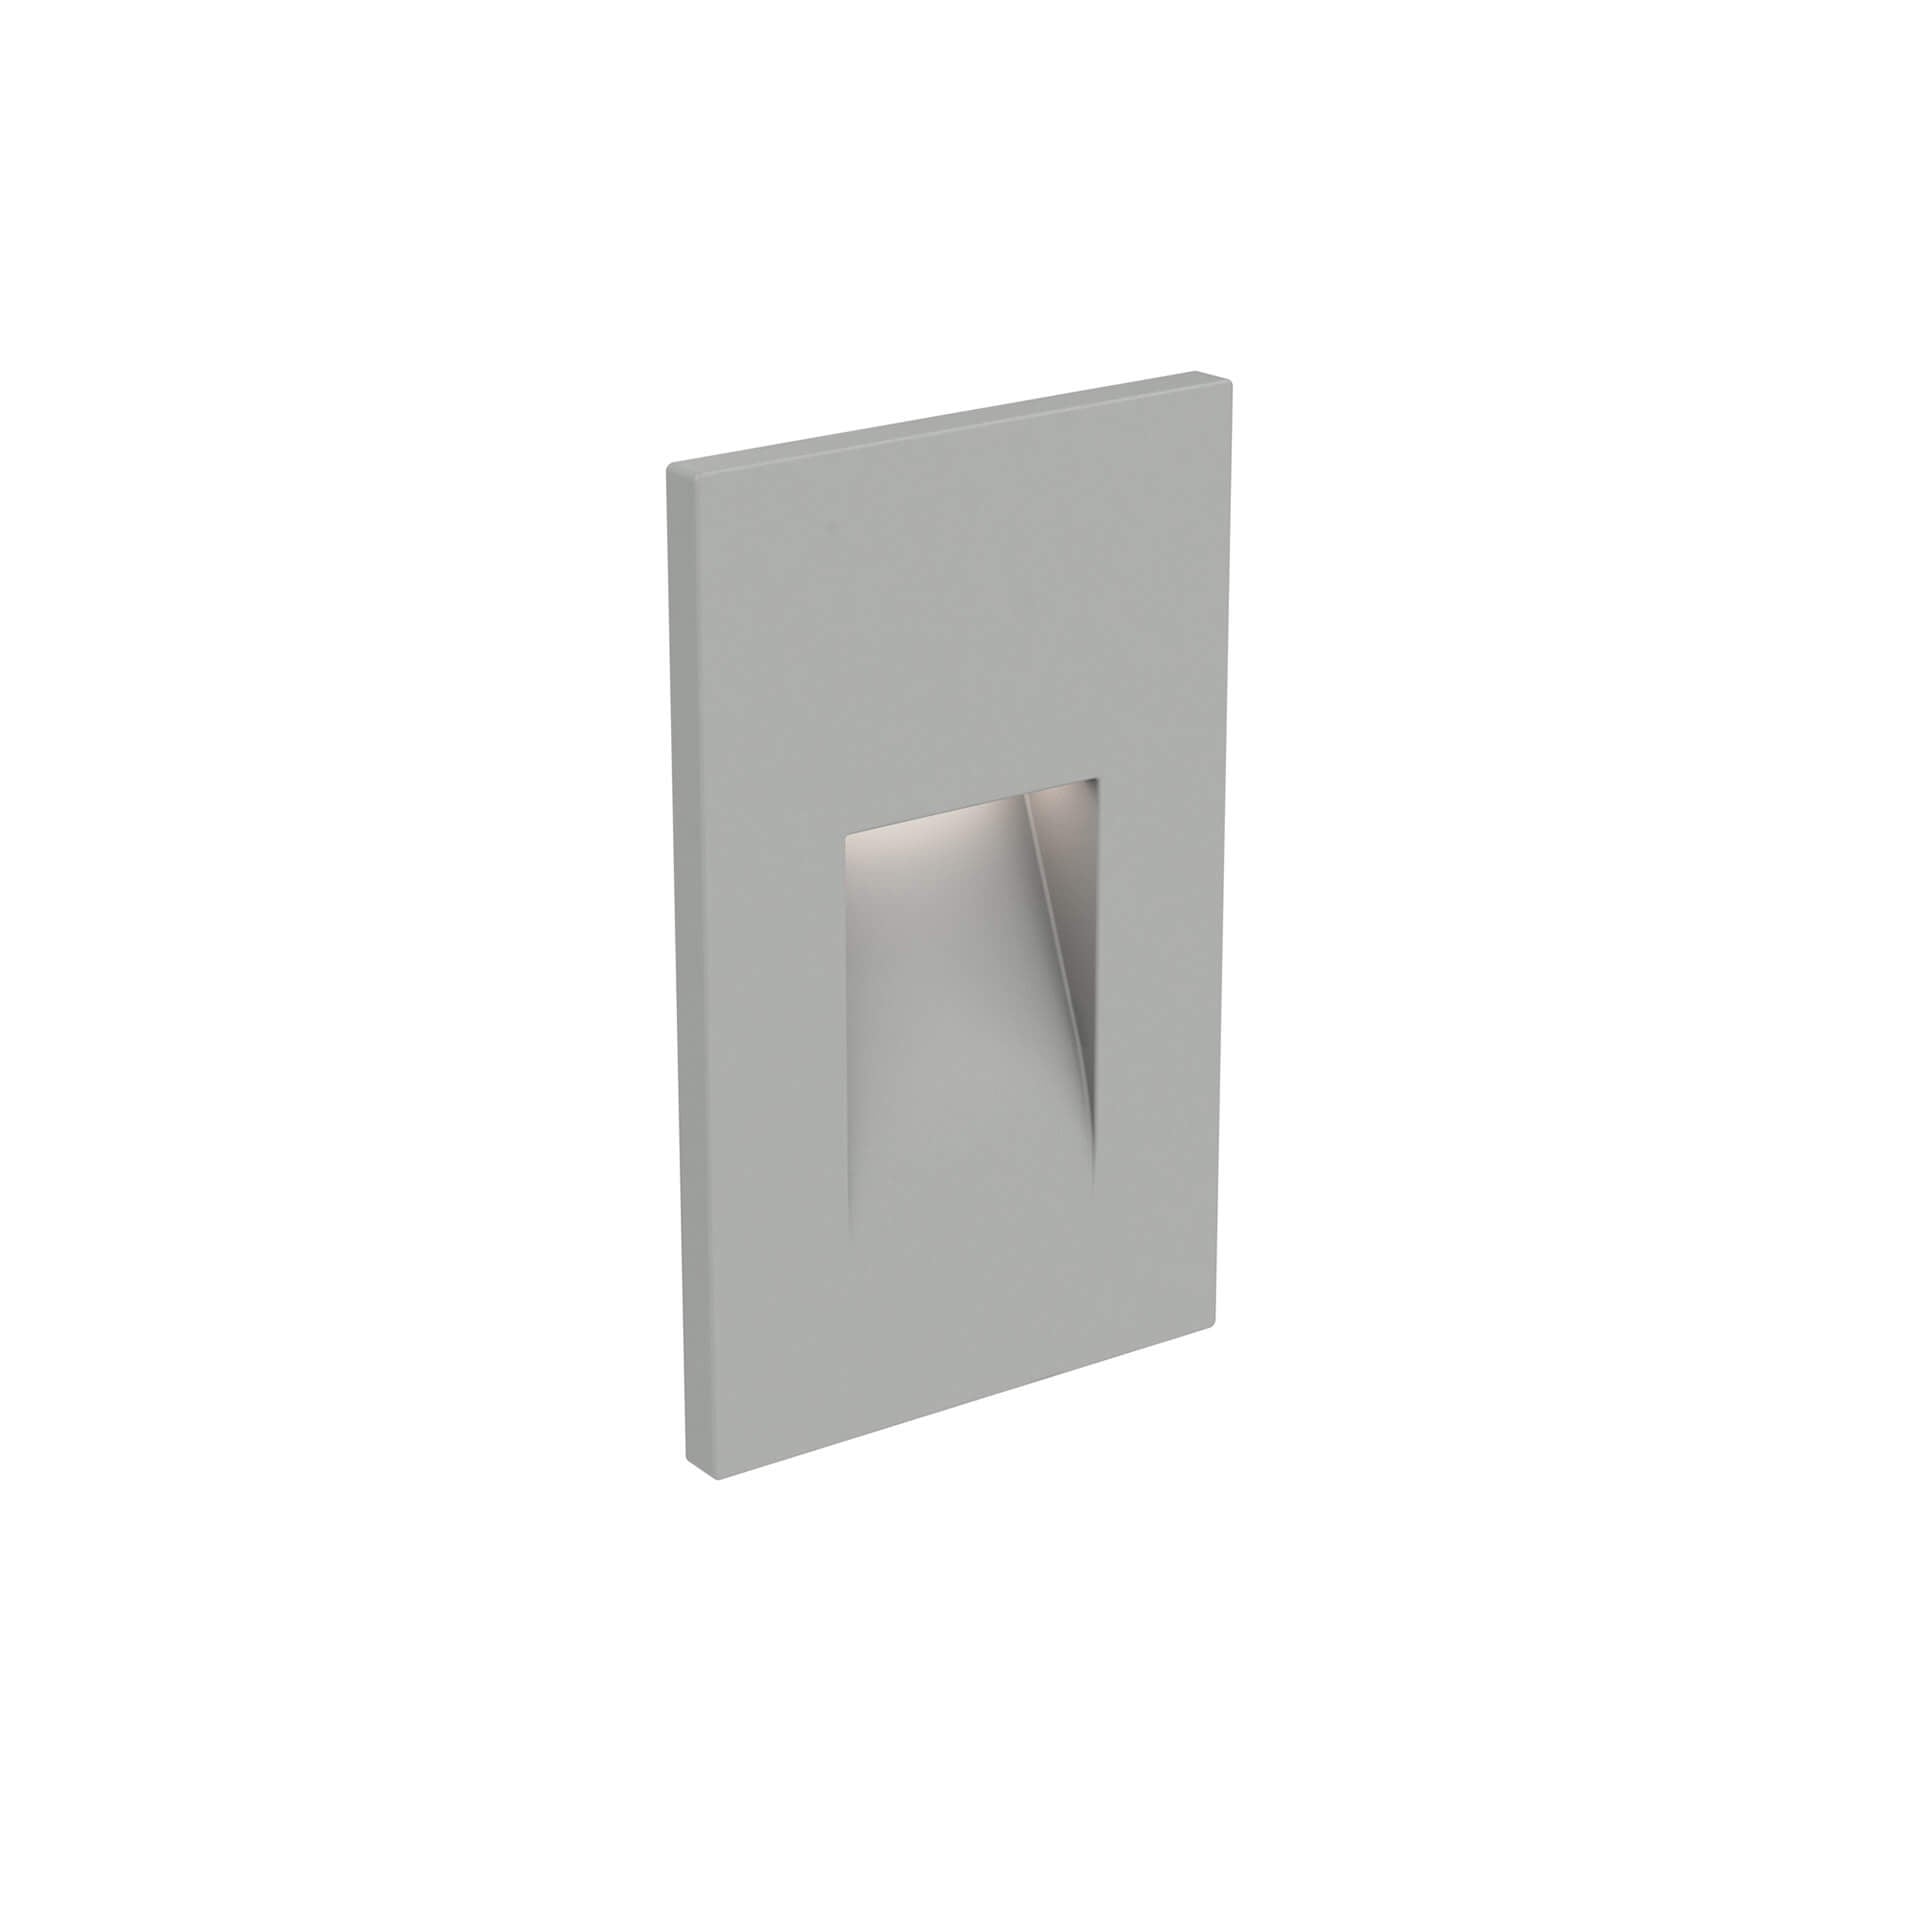 DALS Lighting FORMS Recessed Vertical LED Step Light